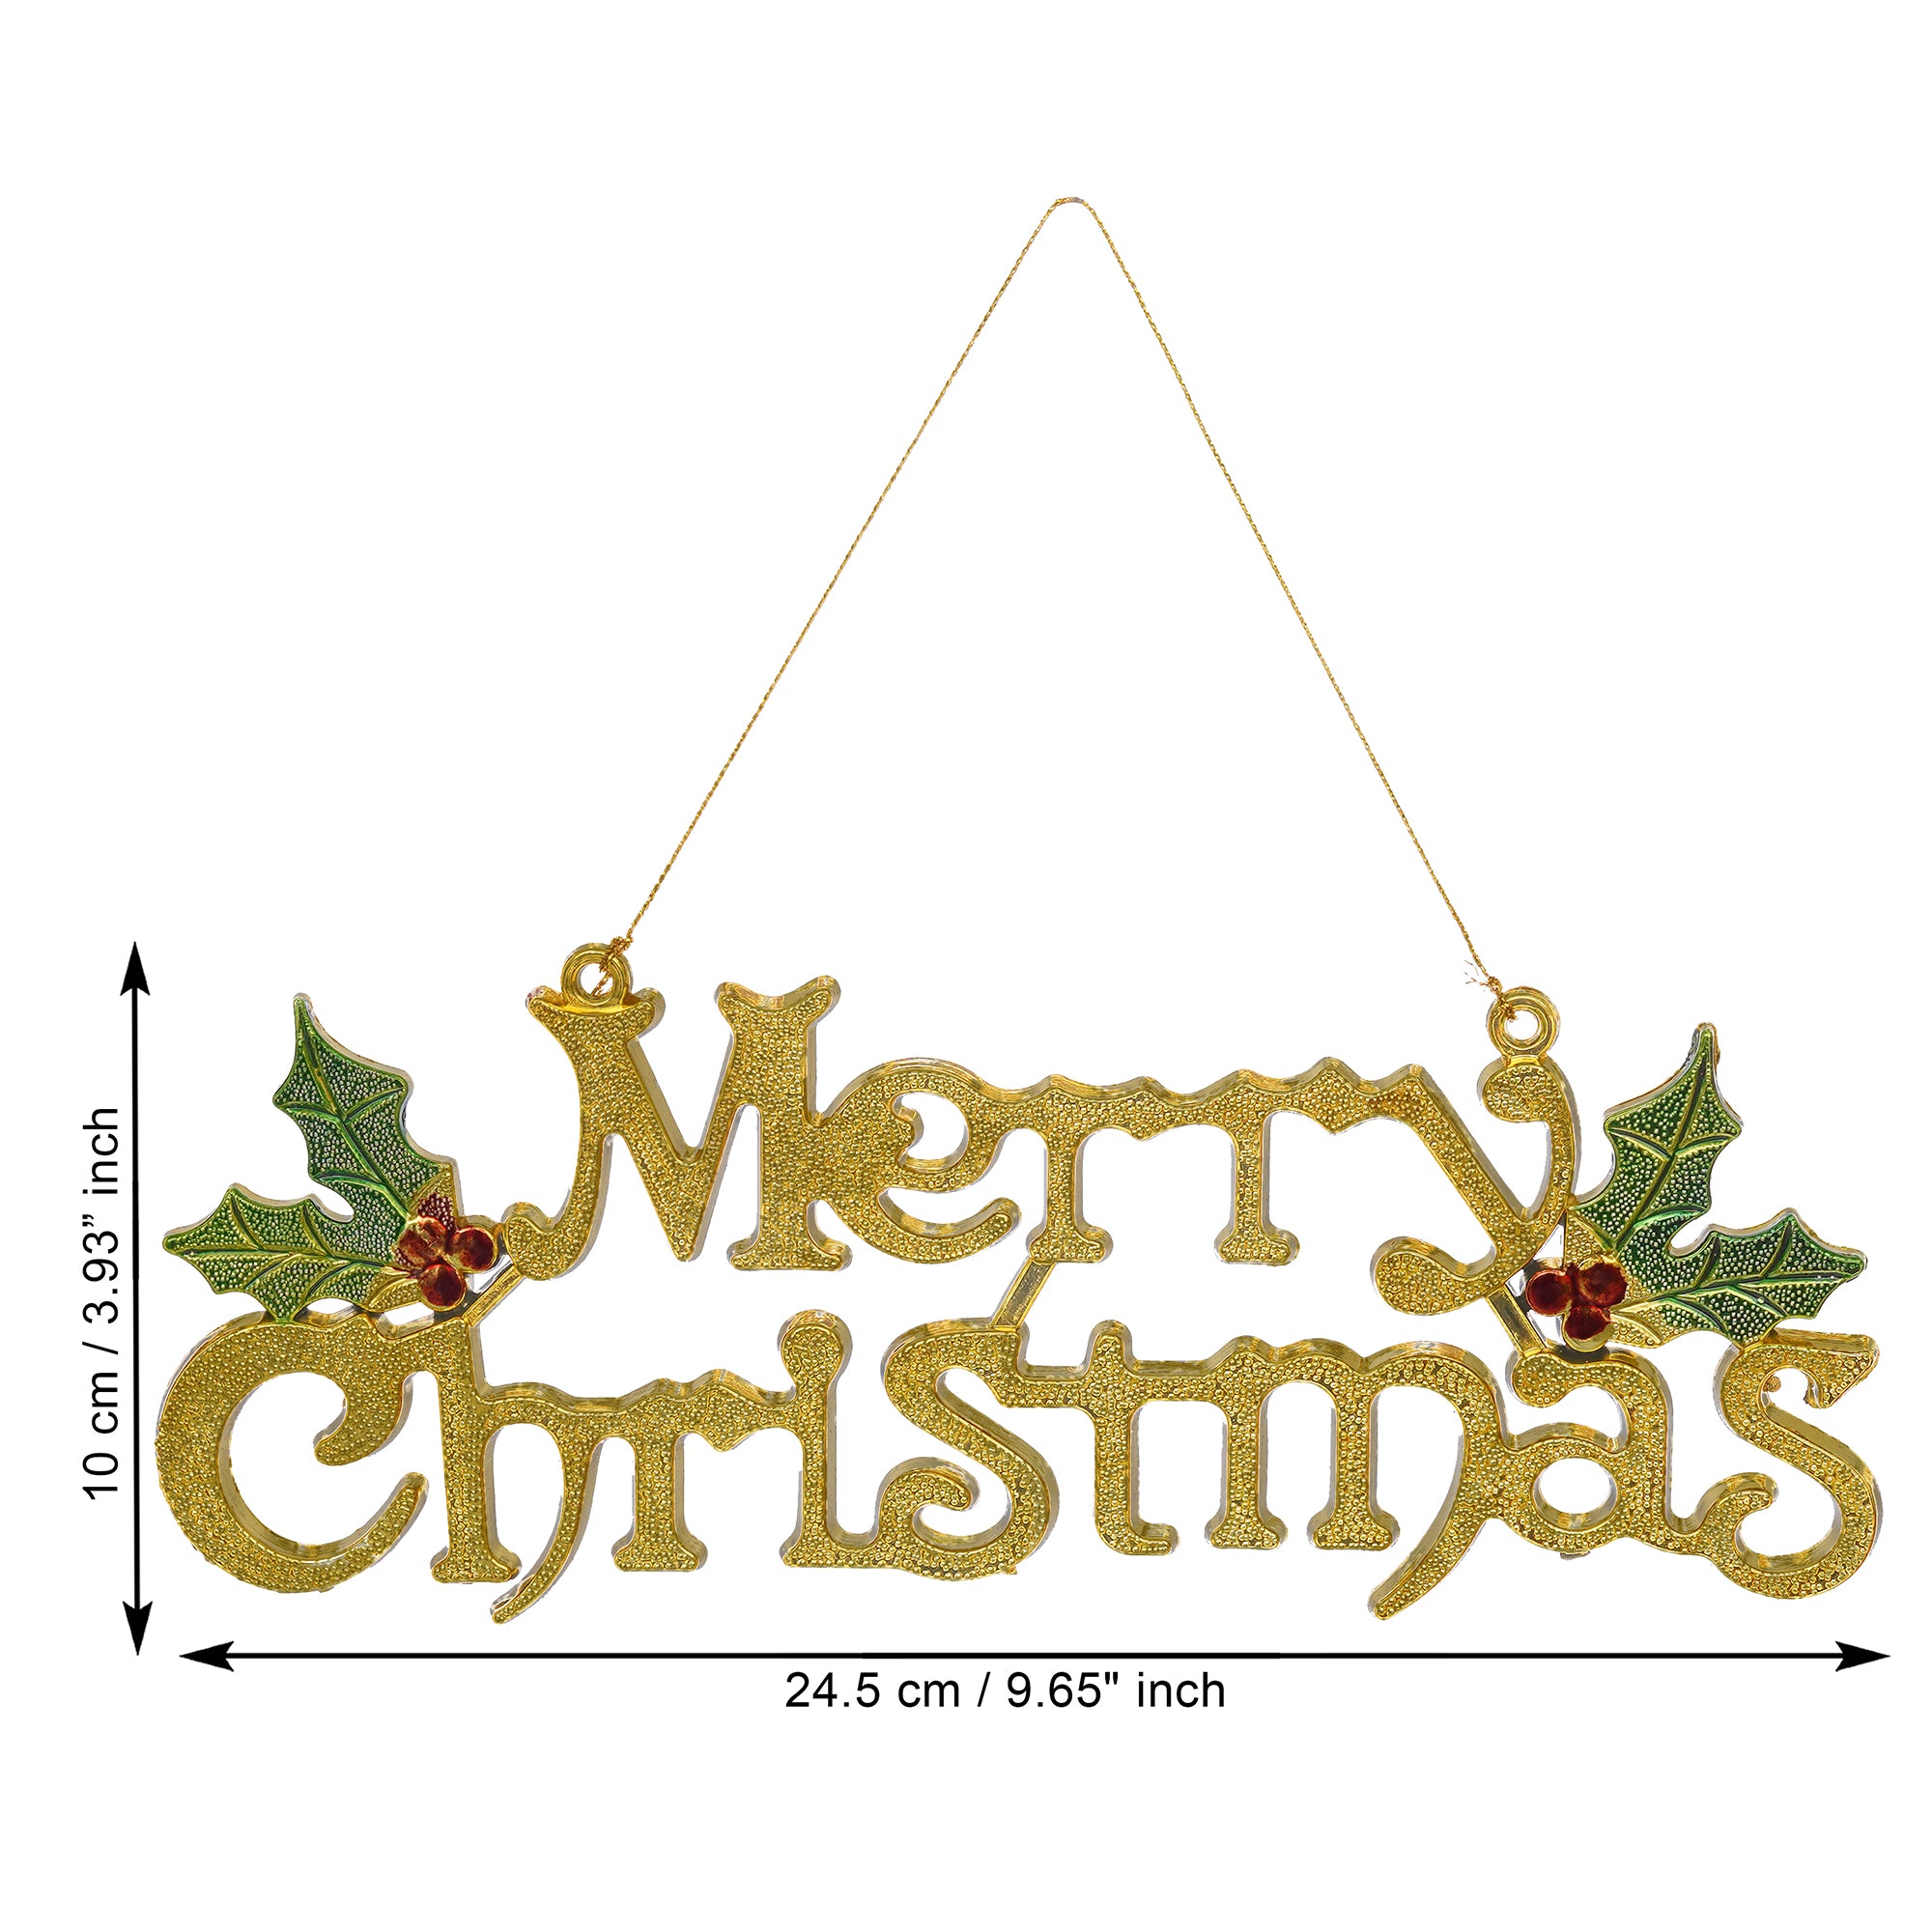 eCraftIndia Green & Gold Merry Christmas Wooden Cutout Wall Hanging Decoration Ornaments Christmas Banner for Home Decor 3